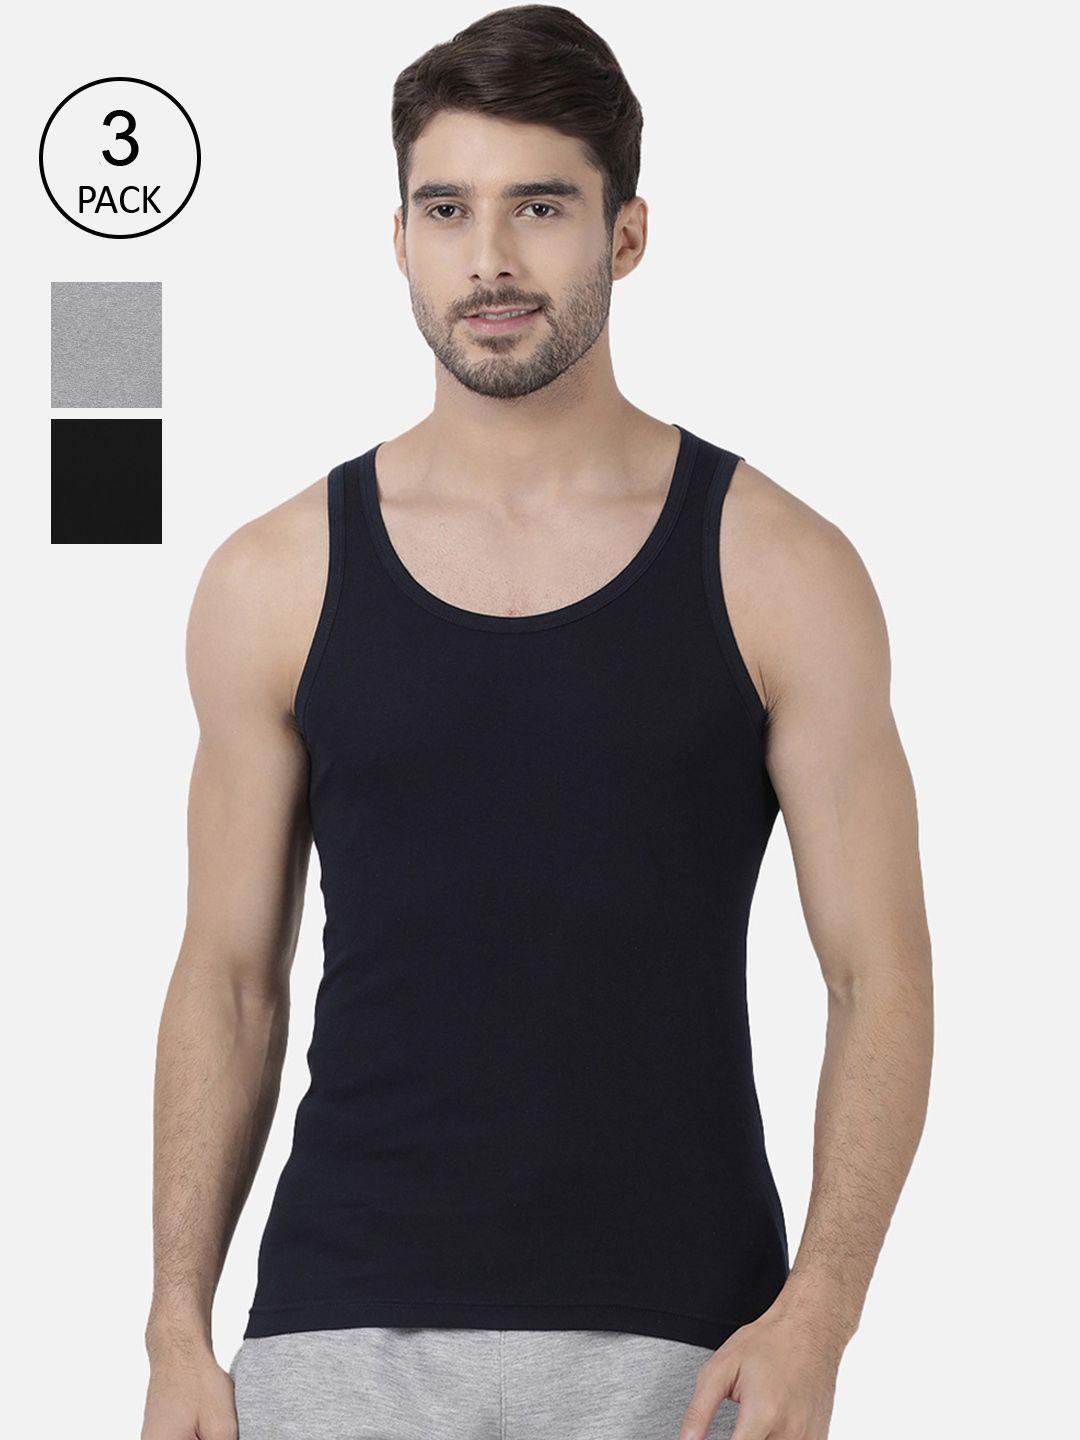 one8 by virat kohli men pack of 3 solid pure super combed cotton basic innerwear vests